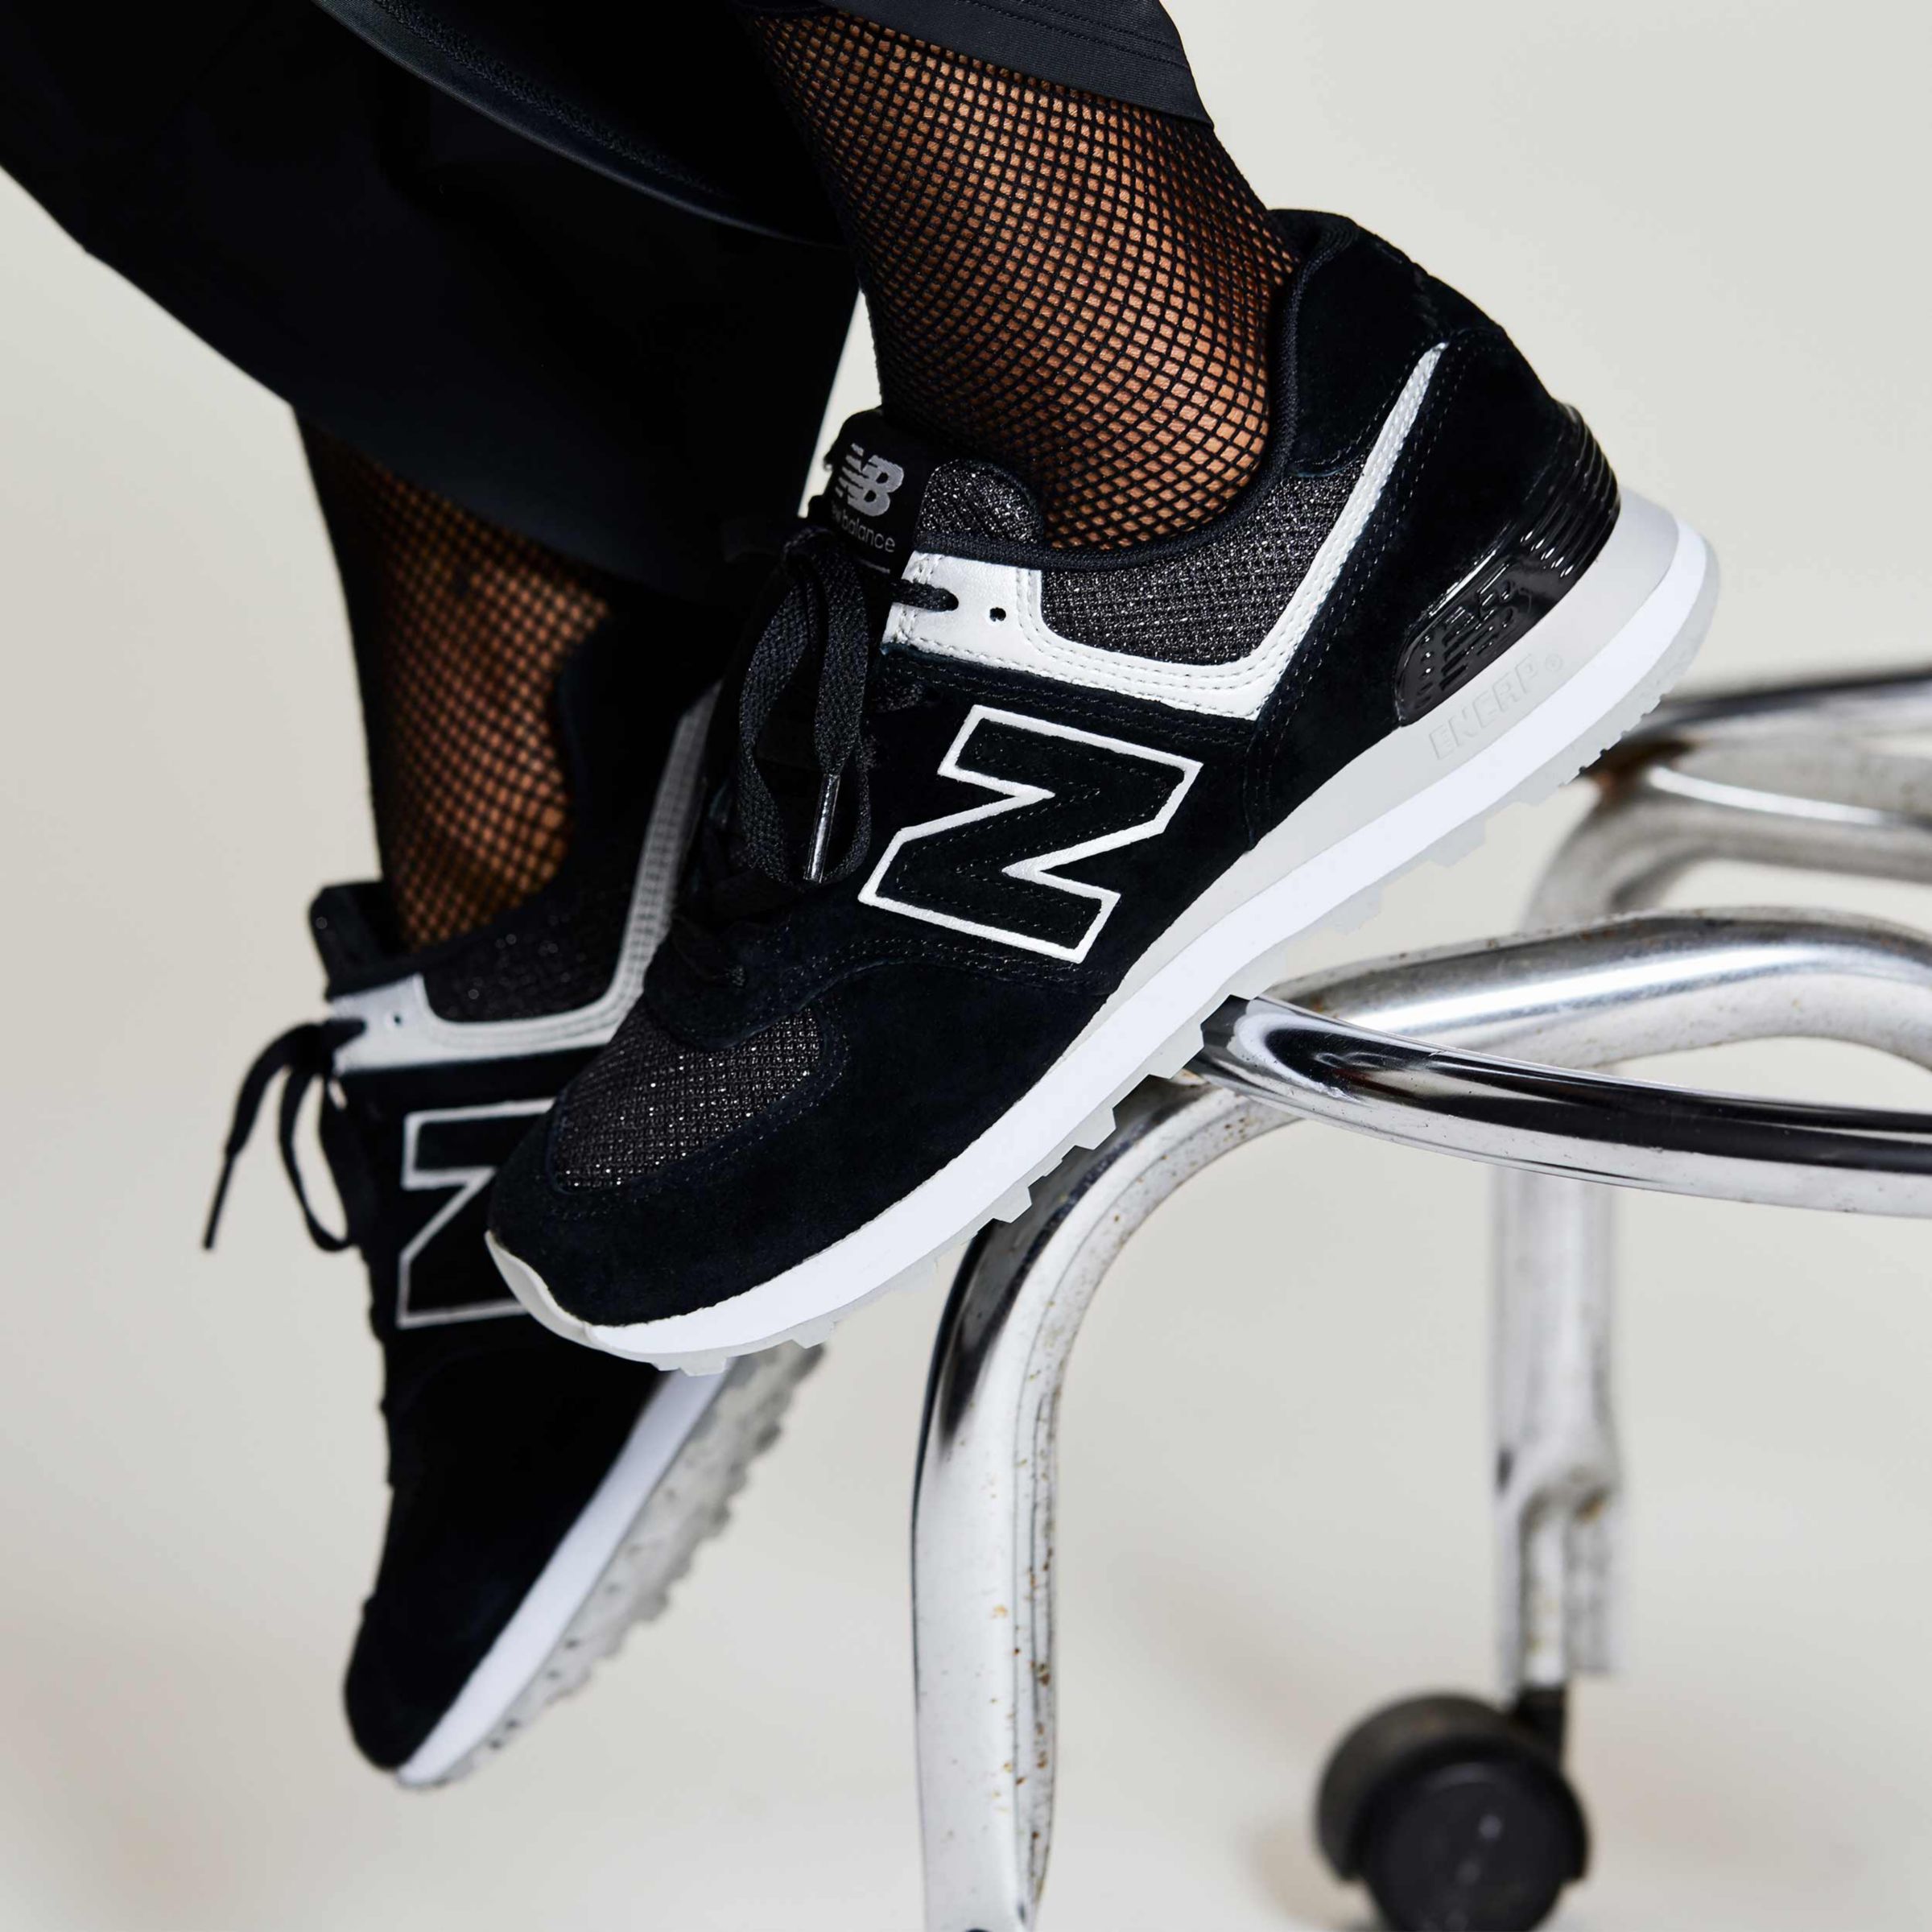 new balance 574 black and silver